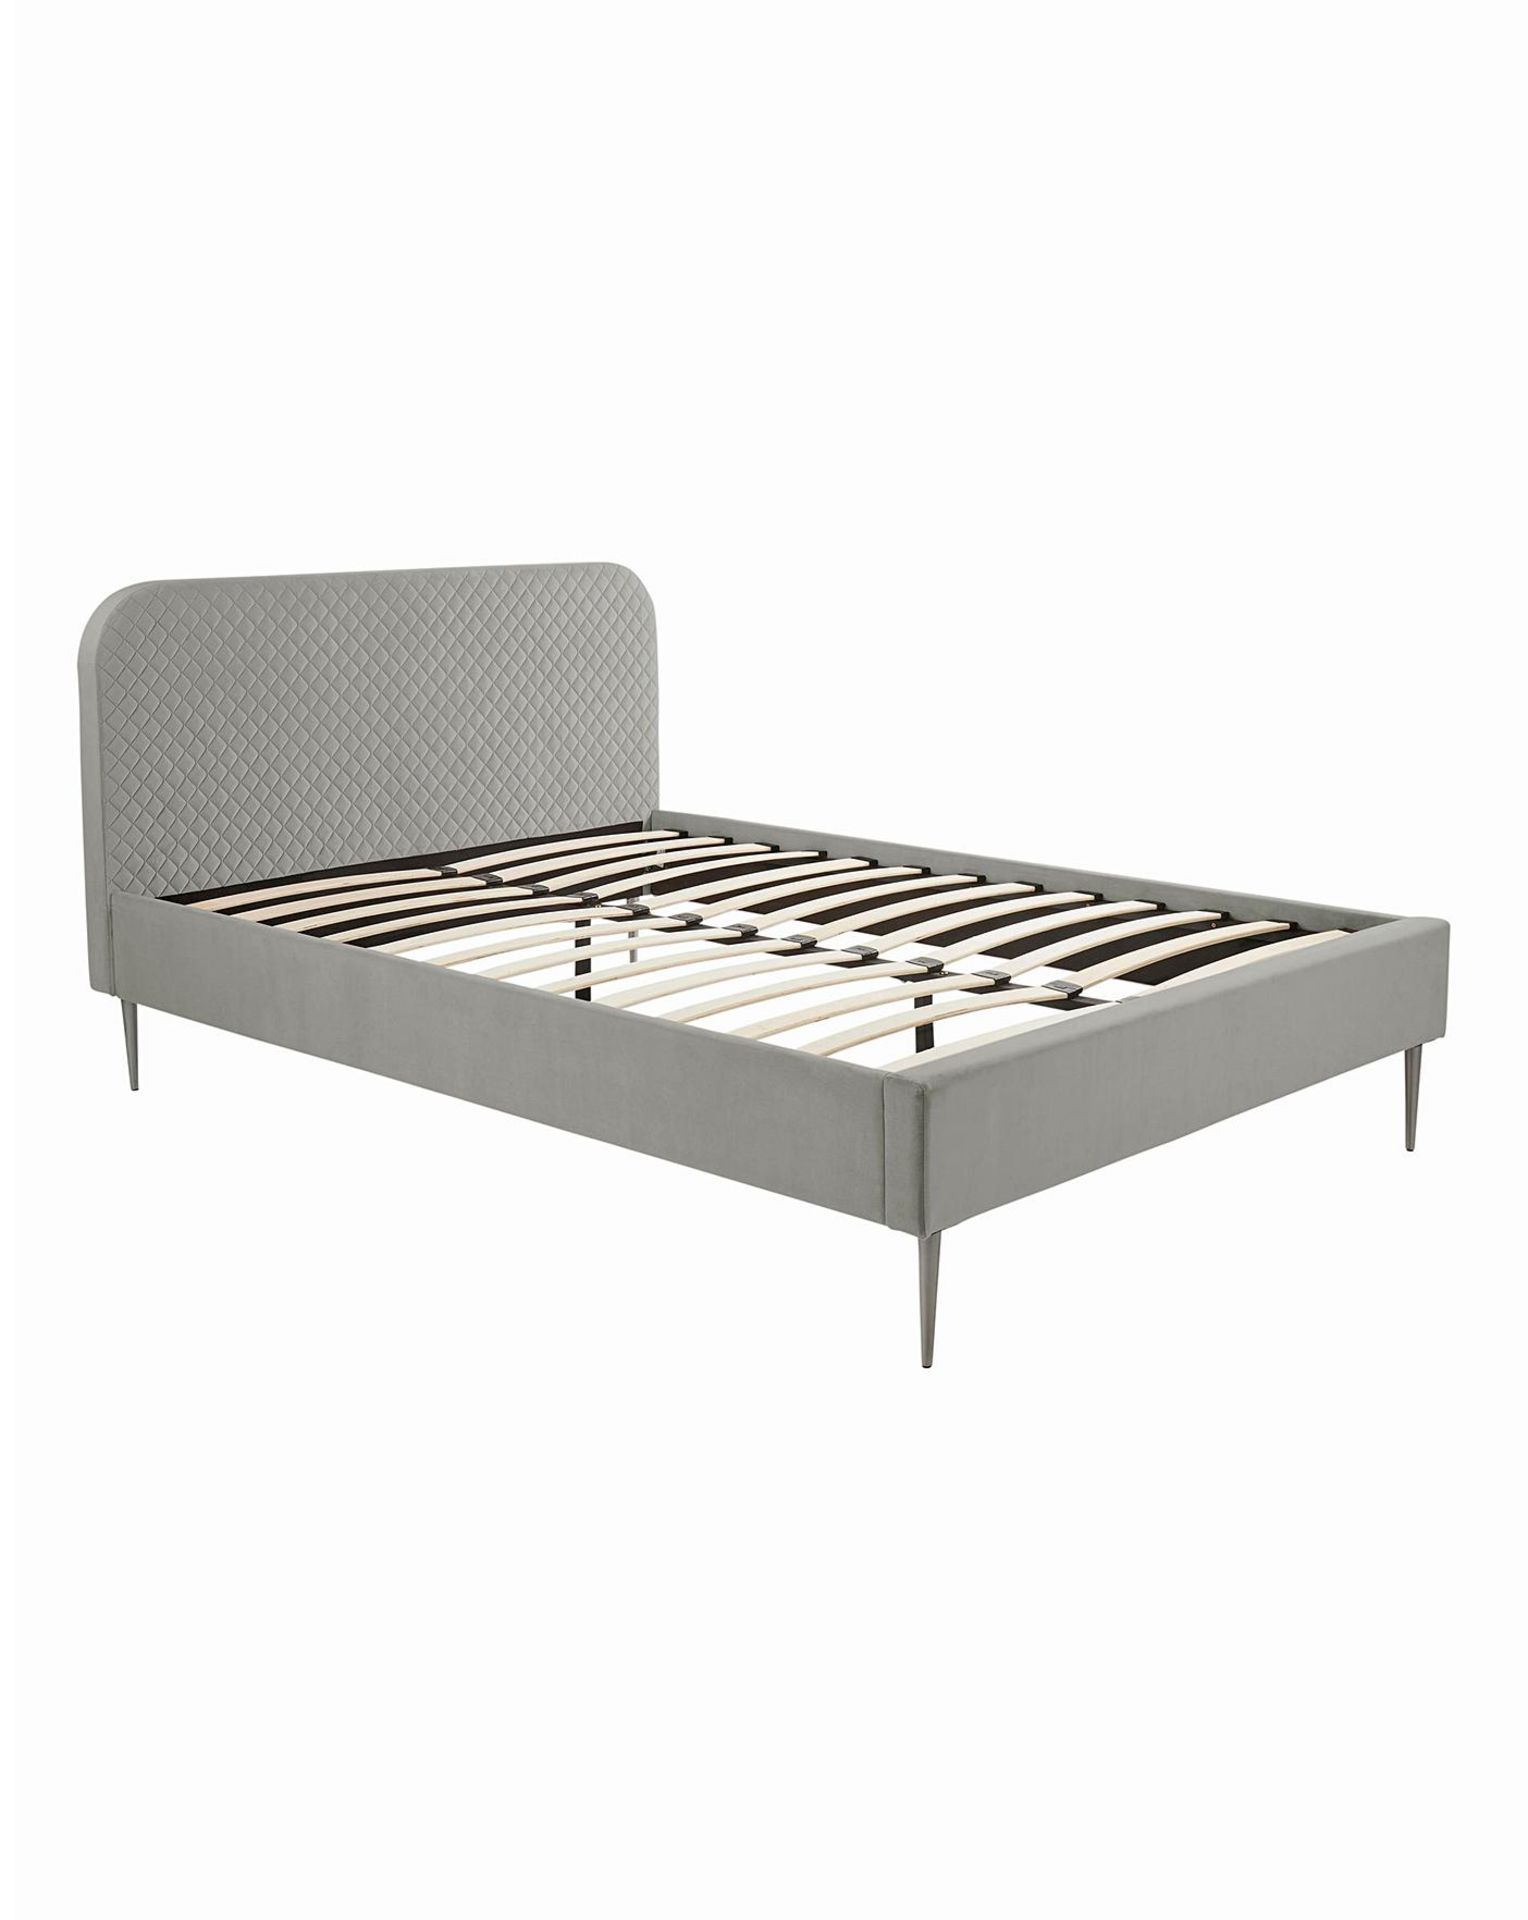 BRAND NEW ARDEN Quilted KING Bed Frame. PEWTER. RRP £489 EACH. The Arden Quilted Bed is the - Image 2 of 2